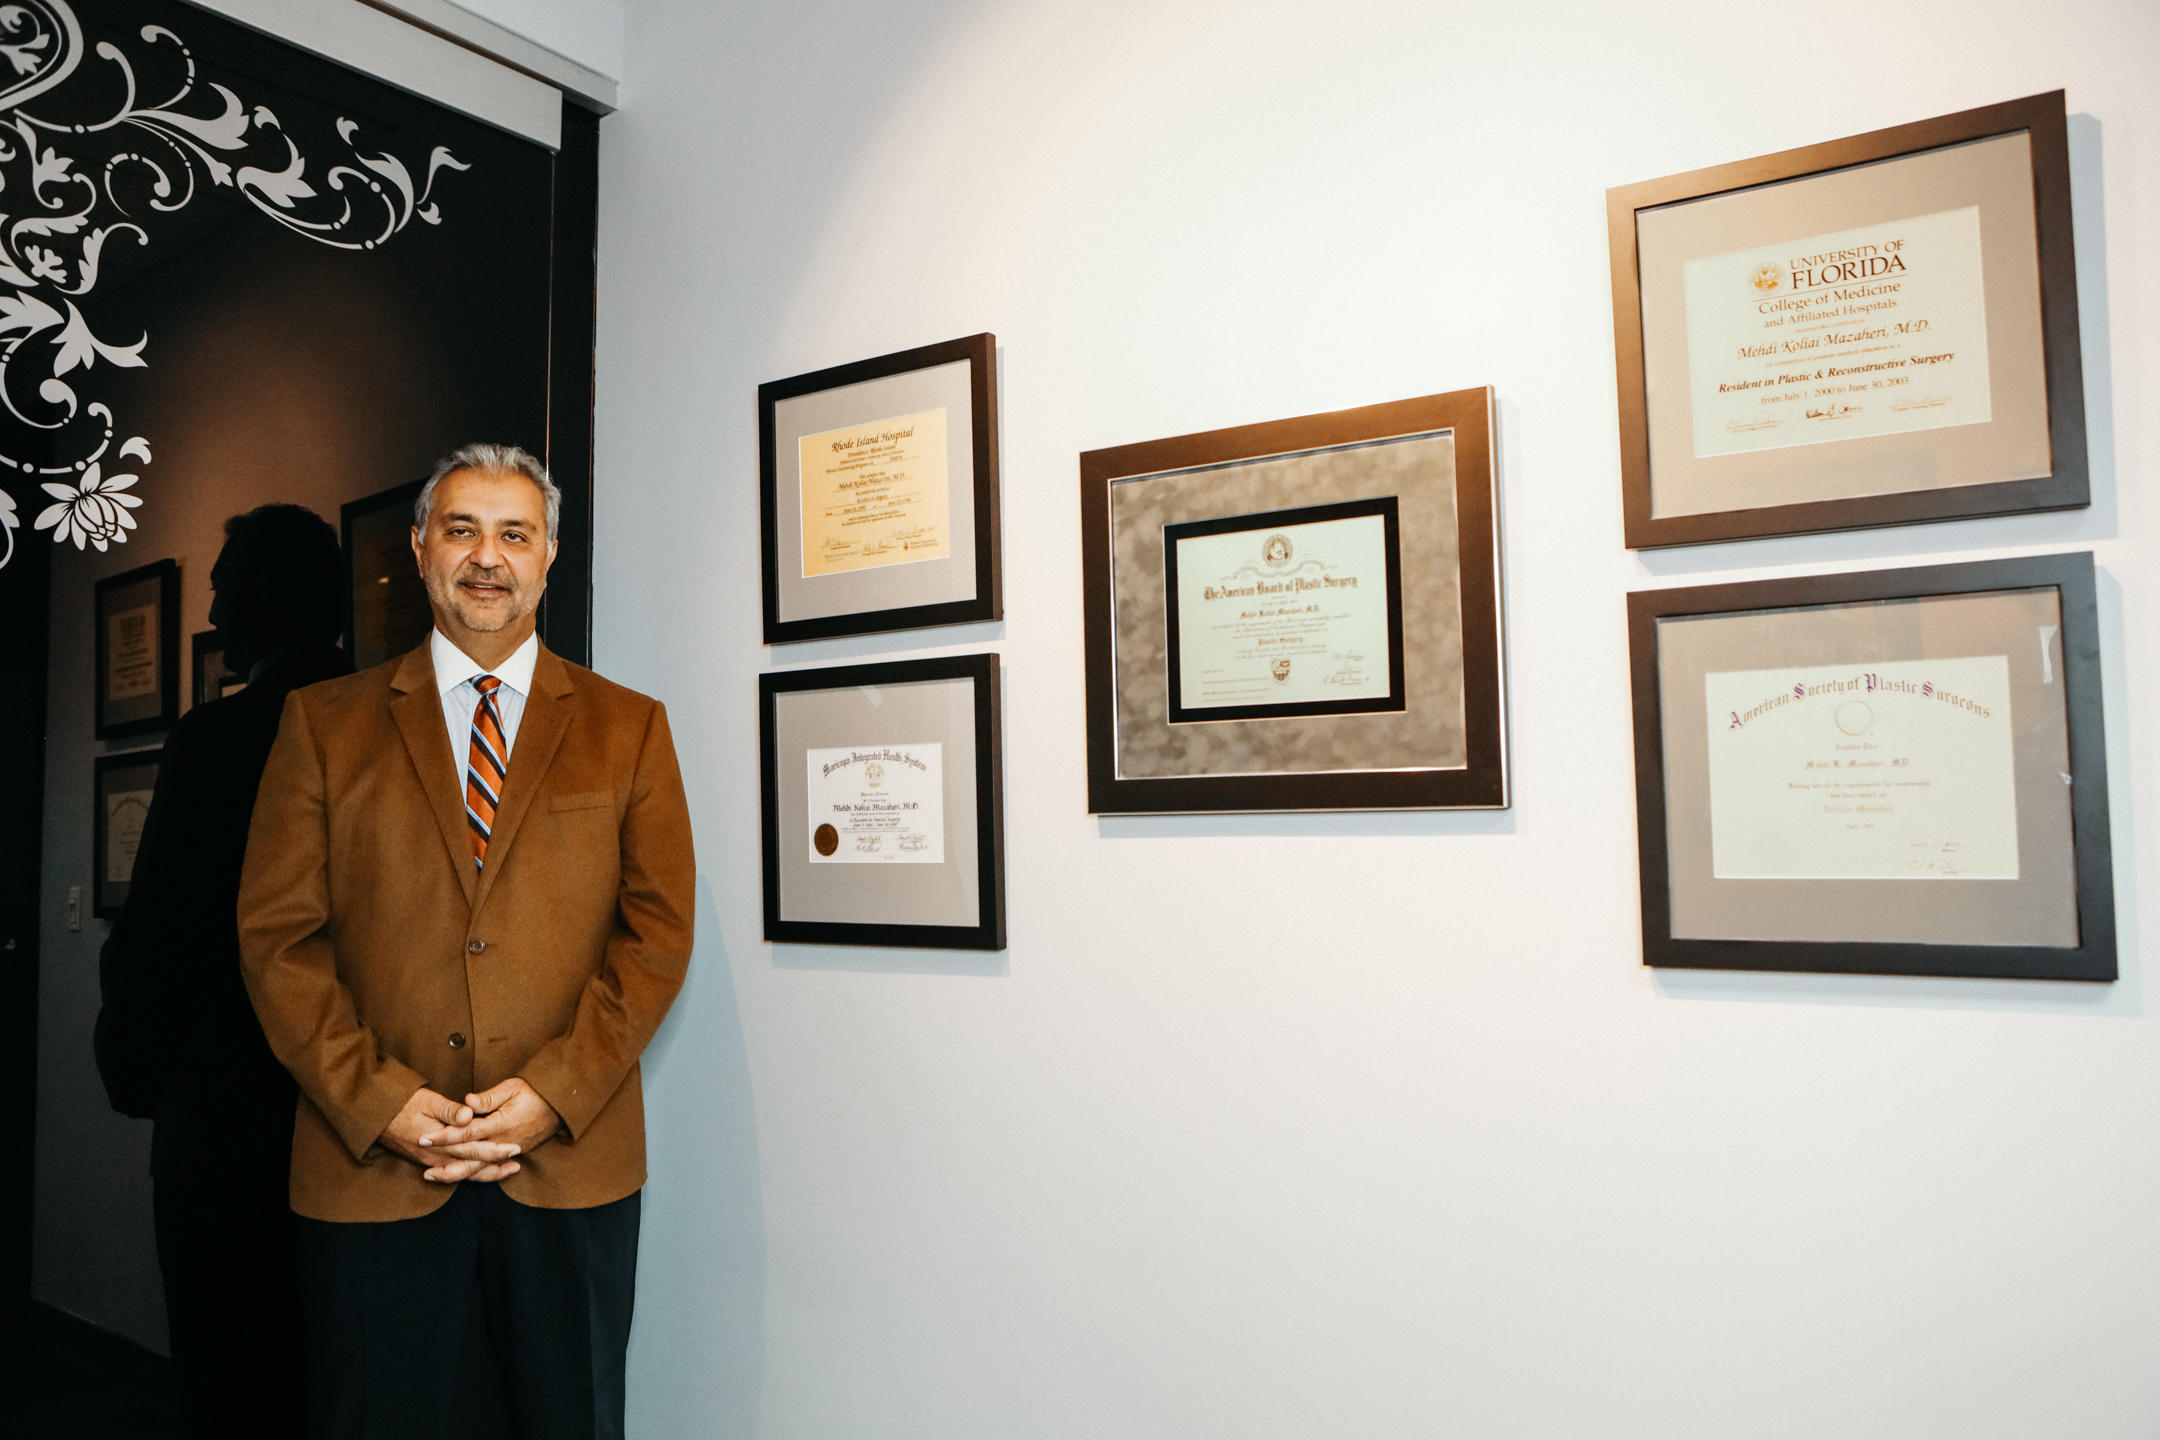 Dr. Mazaheri is a Board Certified Plastic Surgeon and a member of The American Society of Plastic Surgeons. After more than sixteen years of education and advanced training, Dr. Mazaheri opened his Scottsdale practice in 2003. He is a thorough and experienced surgeon with a strong focus on achieving patient needs.